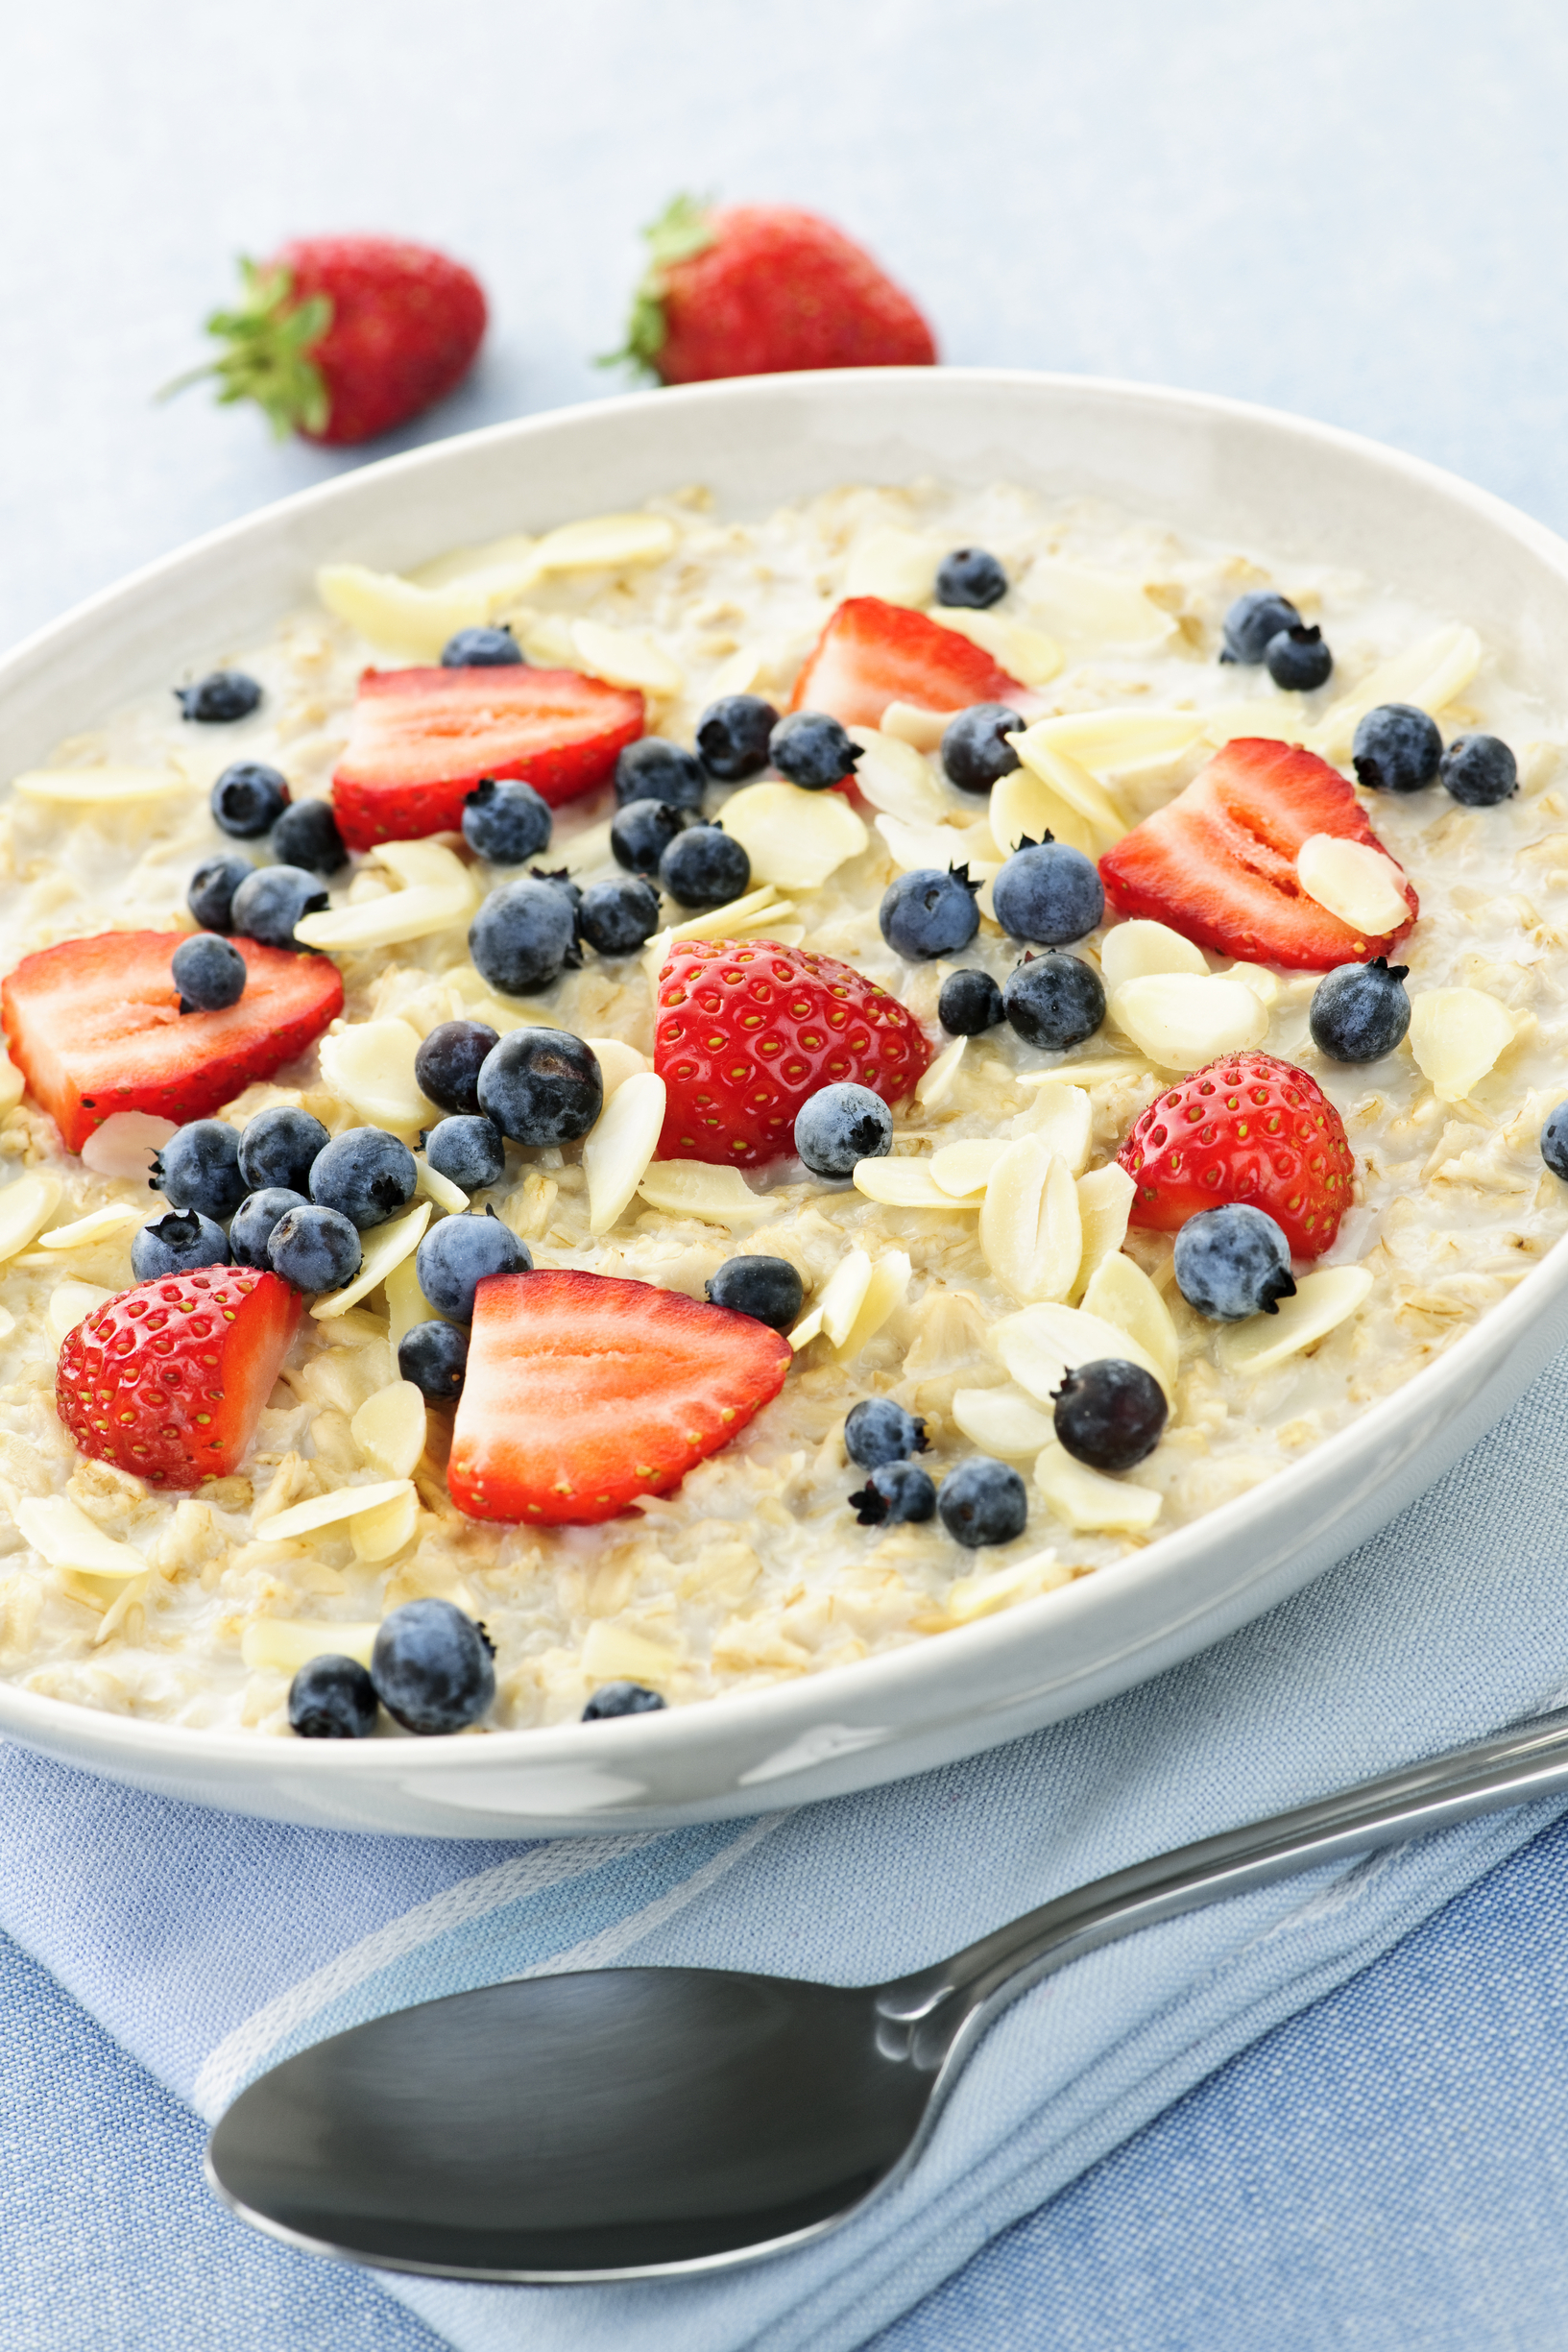 gluten-free oatmeal with fruit is a great solution for diabetics, celiacs and food allergic guests.